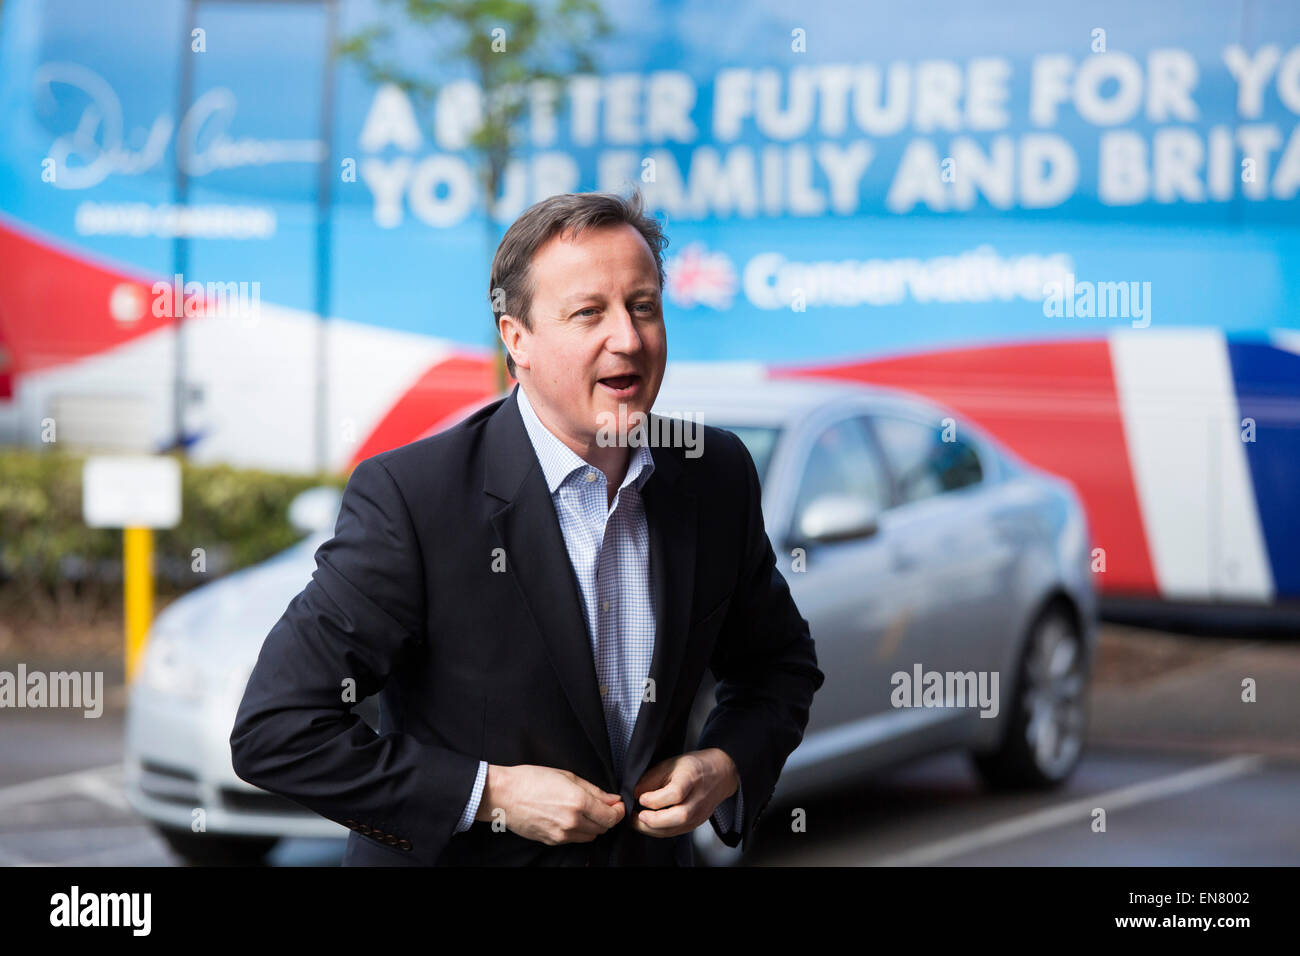 Prime Minister David Cameron visiting Sertec in Coleshill during the Election campaign. Stock Photo